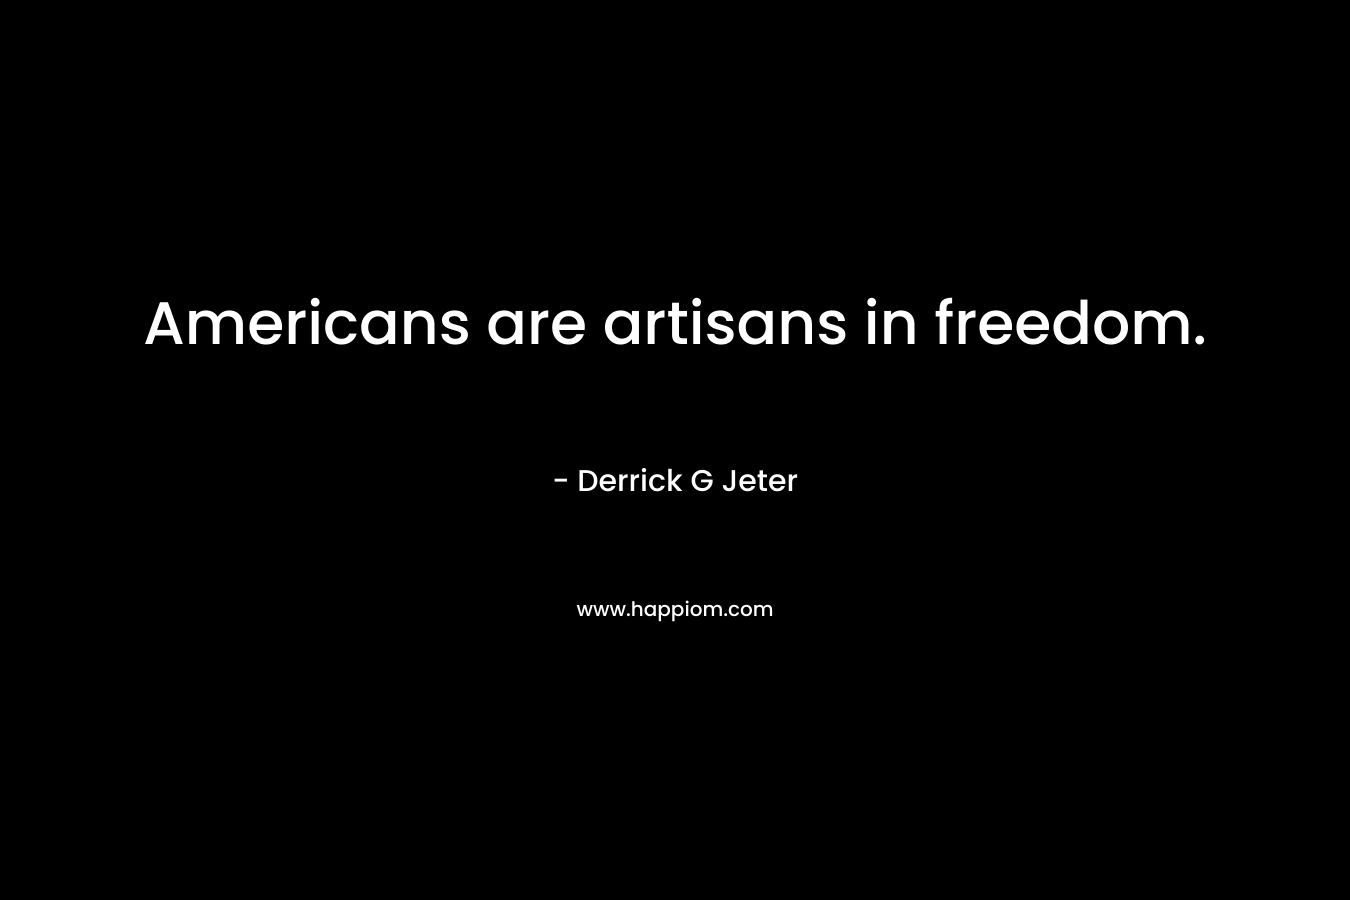 Americans are artisans in freedom.